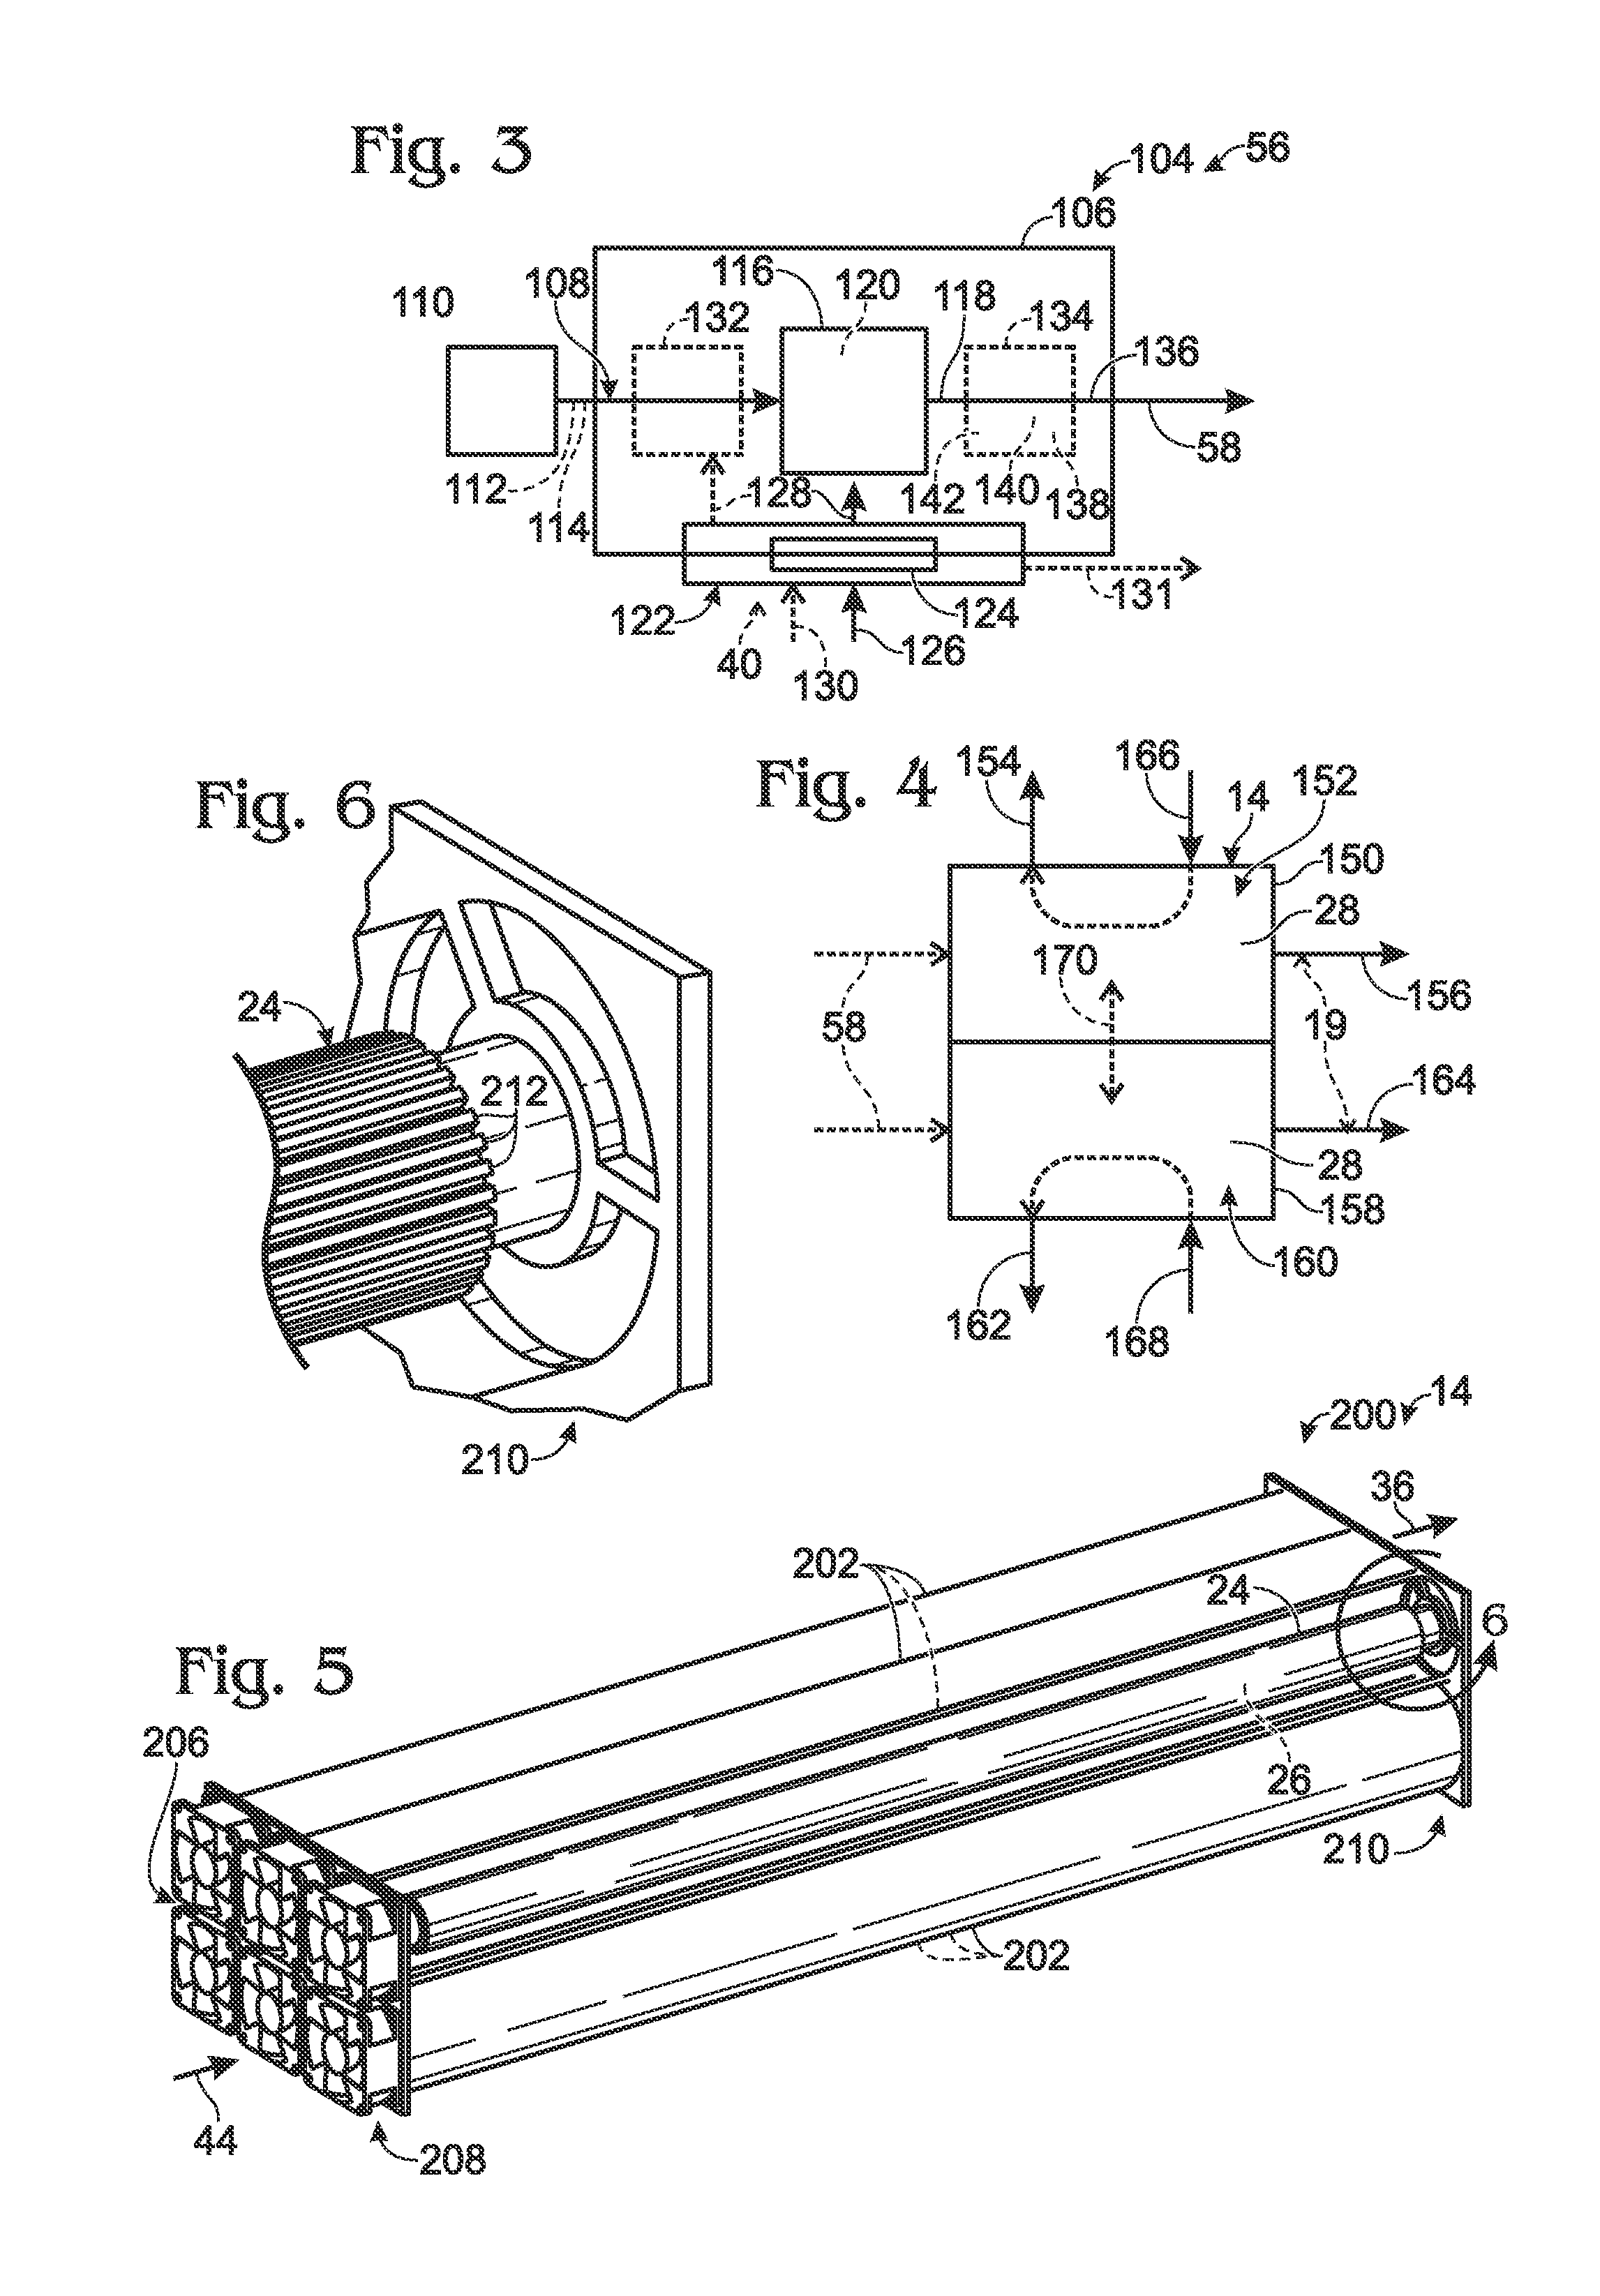 Fuel cell systems and methods for providing power and cooling to an energy-consuming device